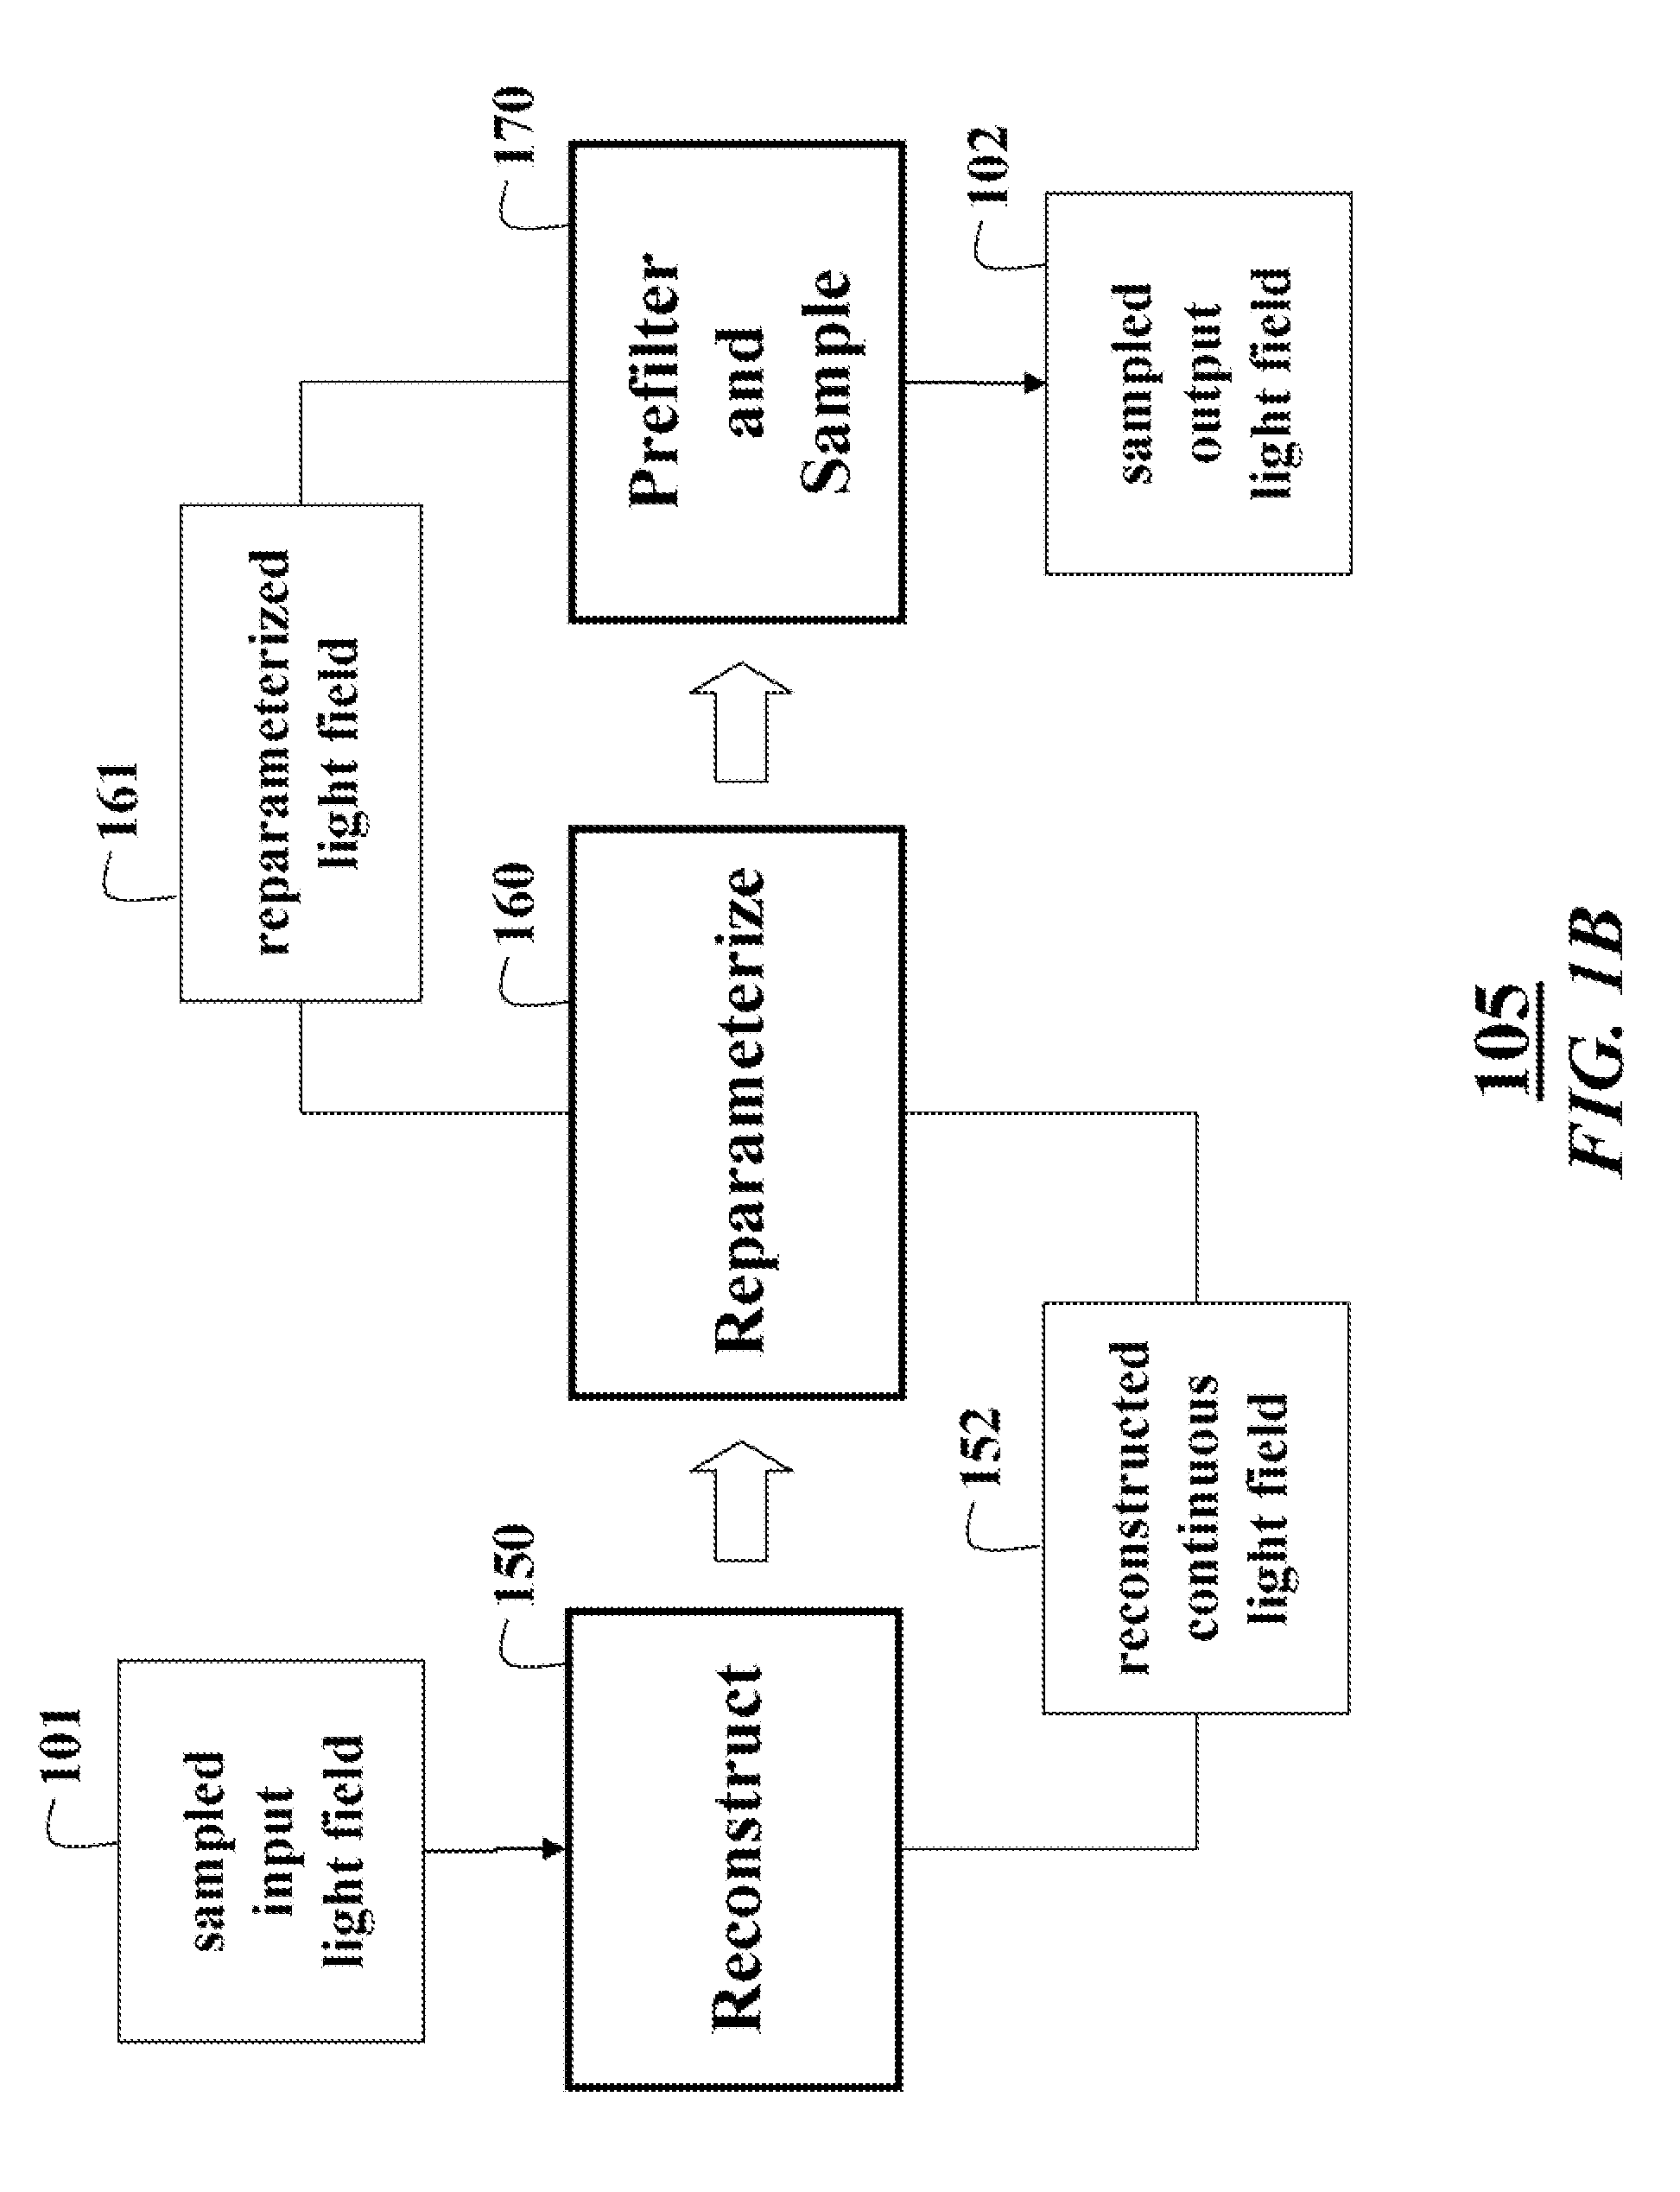 Method and System for Acquiring, Encoding, Decoding and Displaying 3D Light Fields